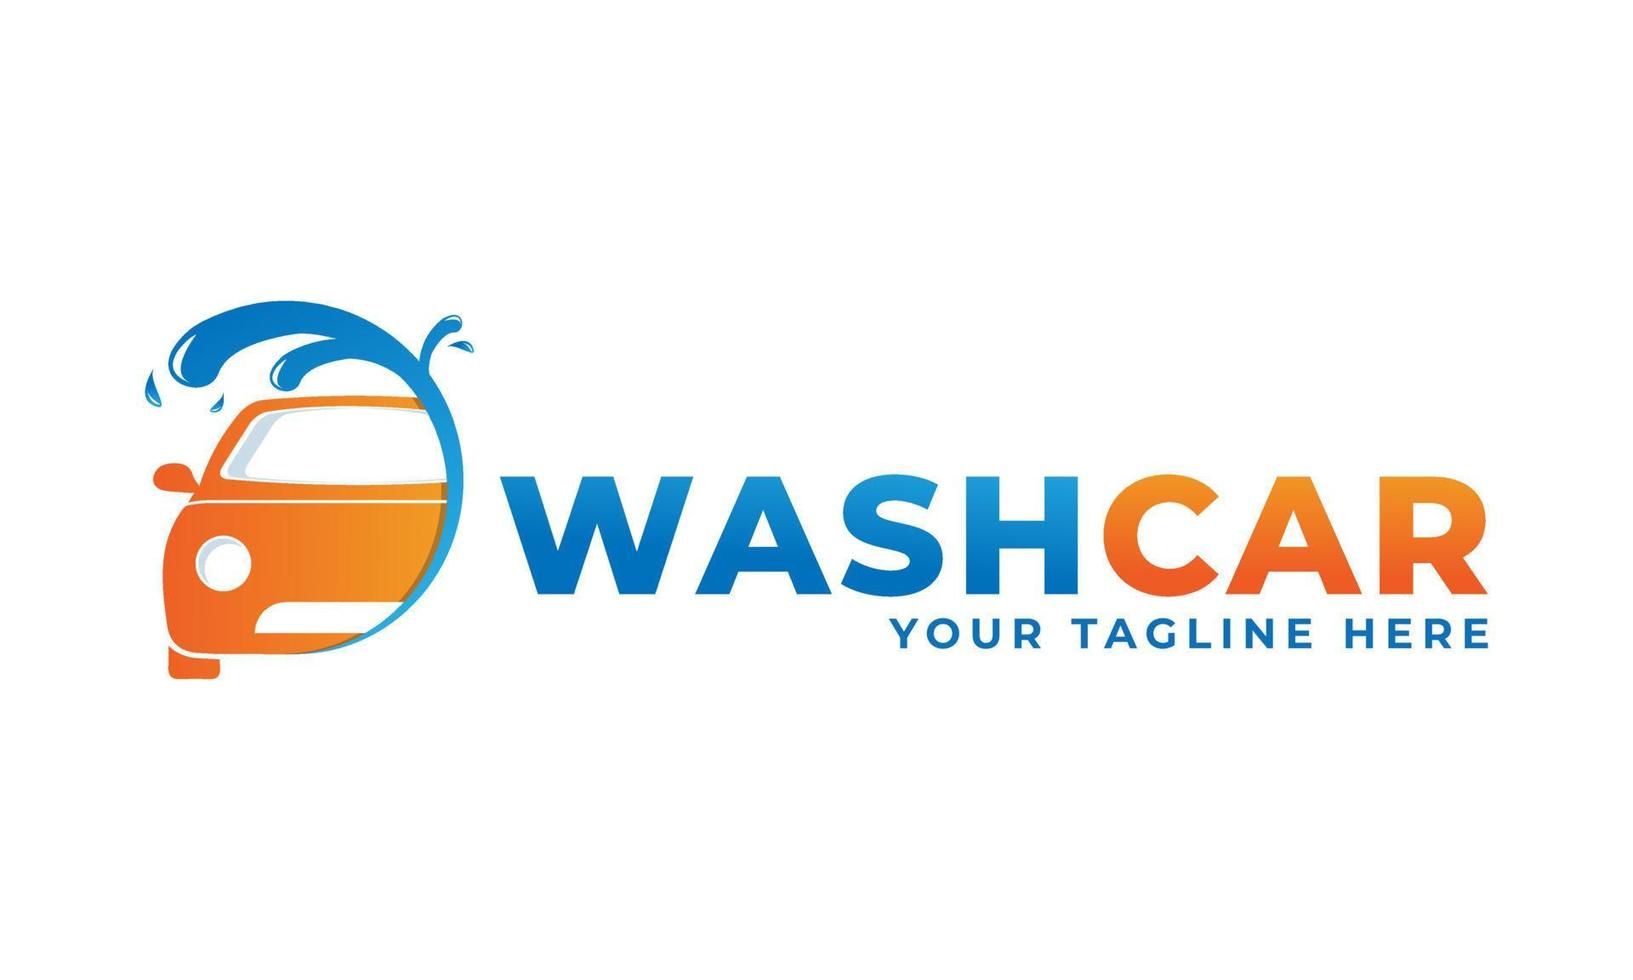 Logo Car Wash with Splashed Water, Cleaning Car, Washing and Service Vector Logo Design.